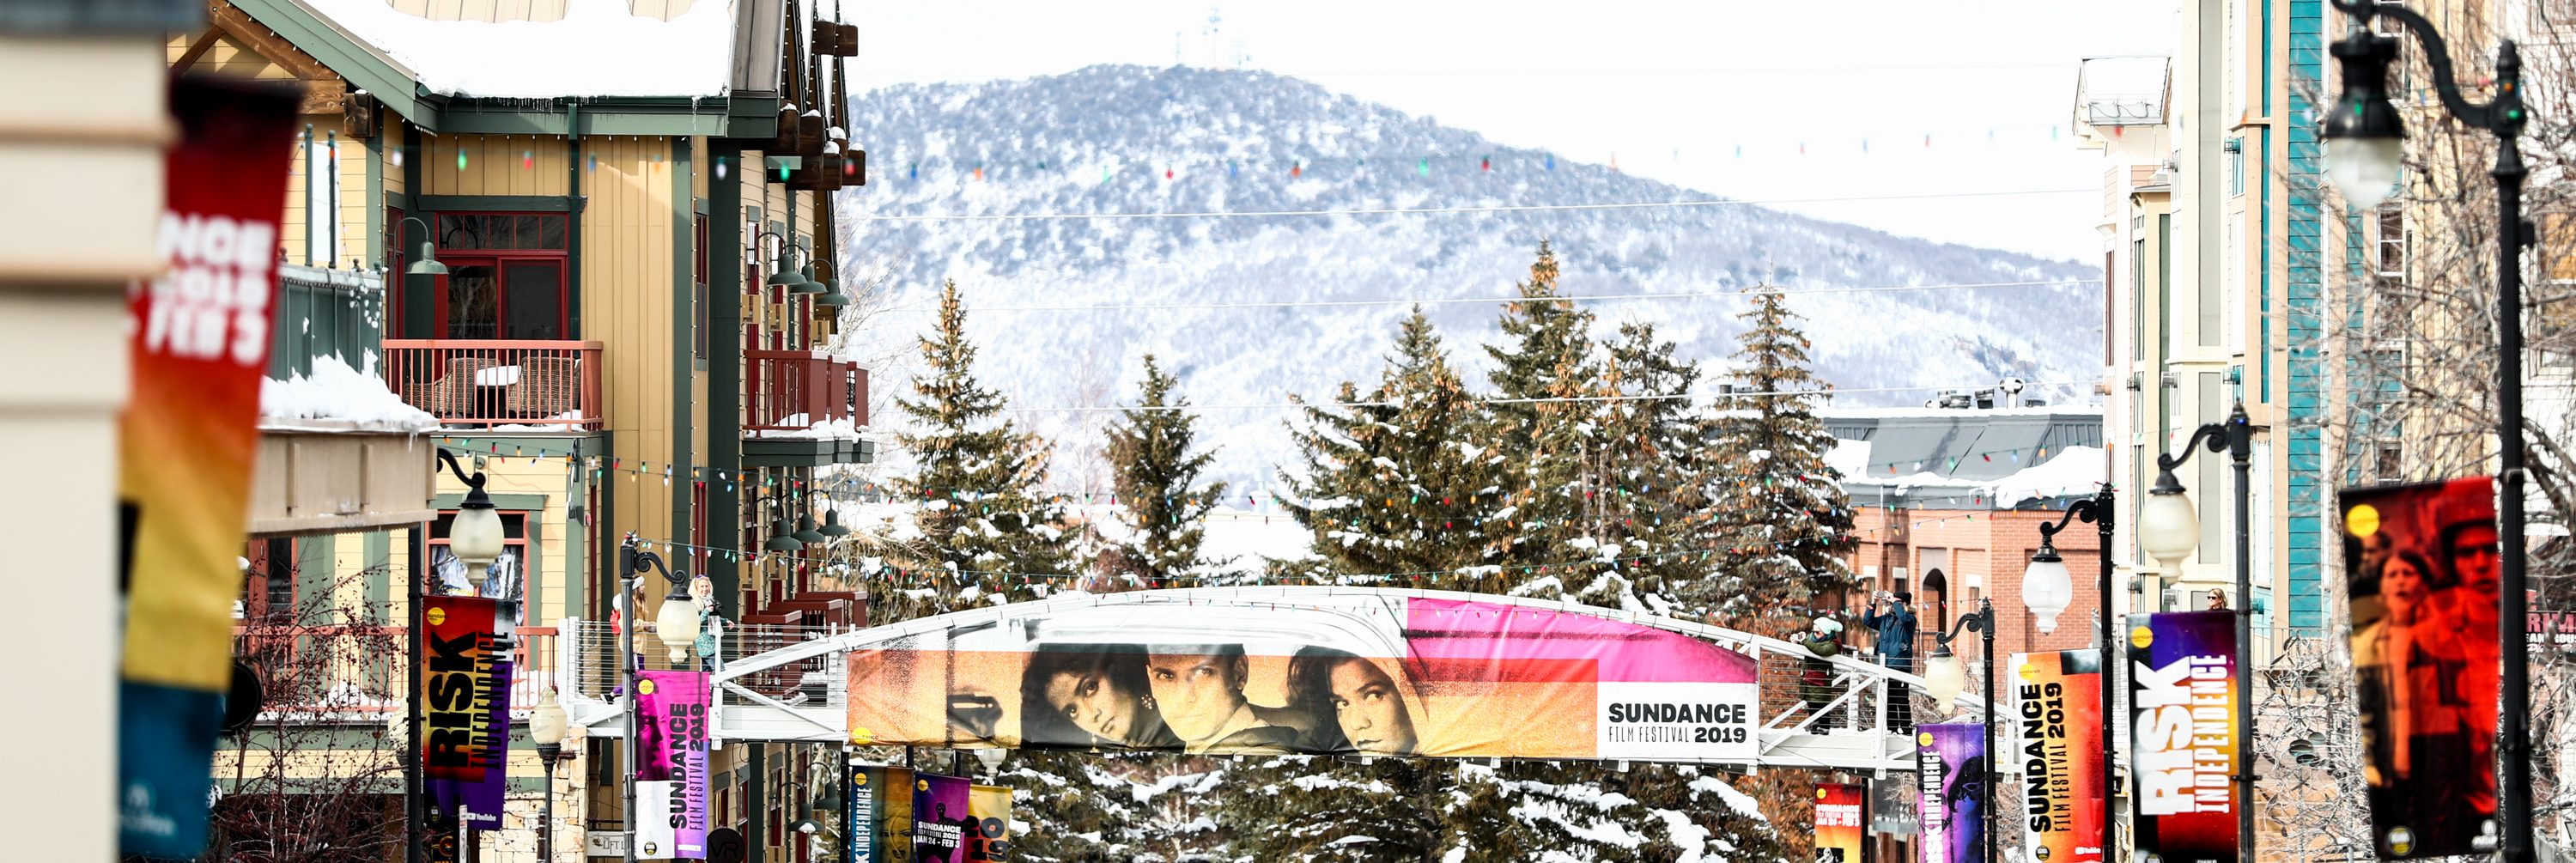 Festival signage is seen on Main Street during the 2019 Sundance Film Festival on January 25, 2019 in Park City, Utah. (Photo by Rich Fury/Getty Images,)